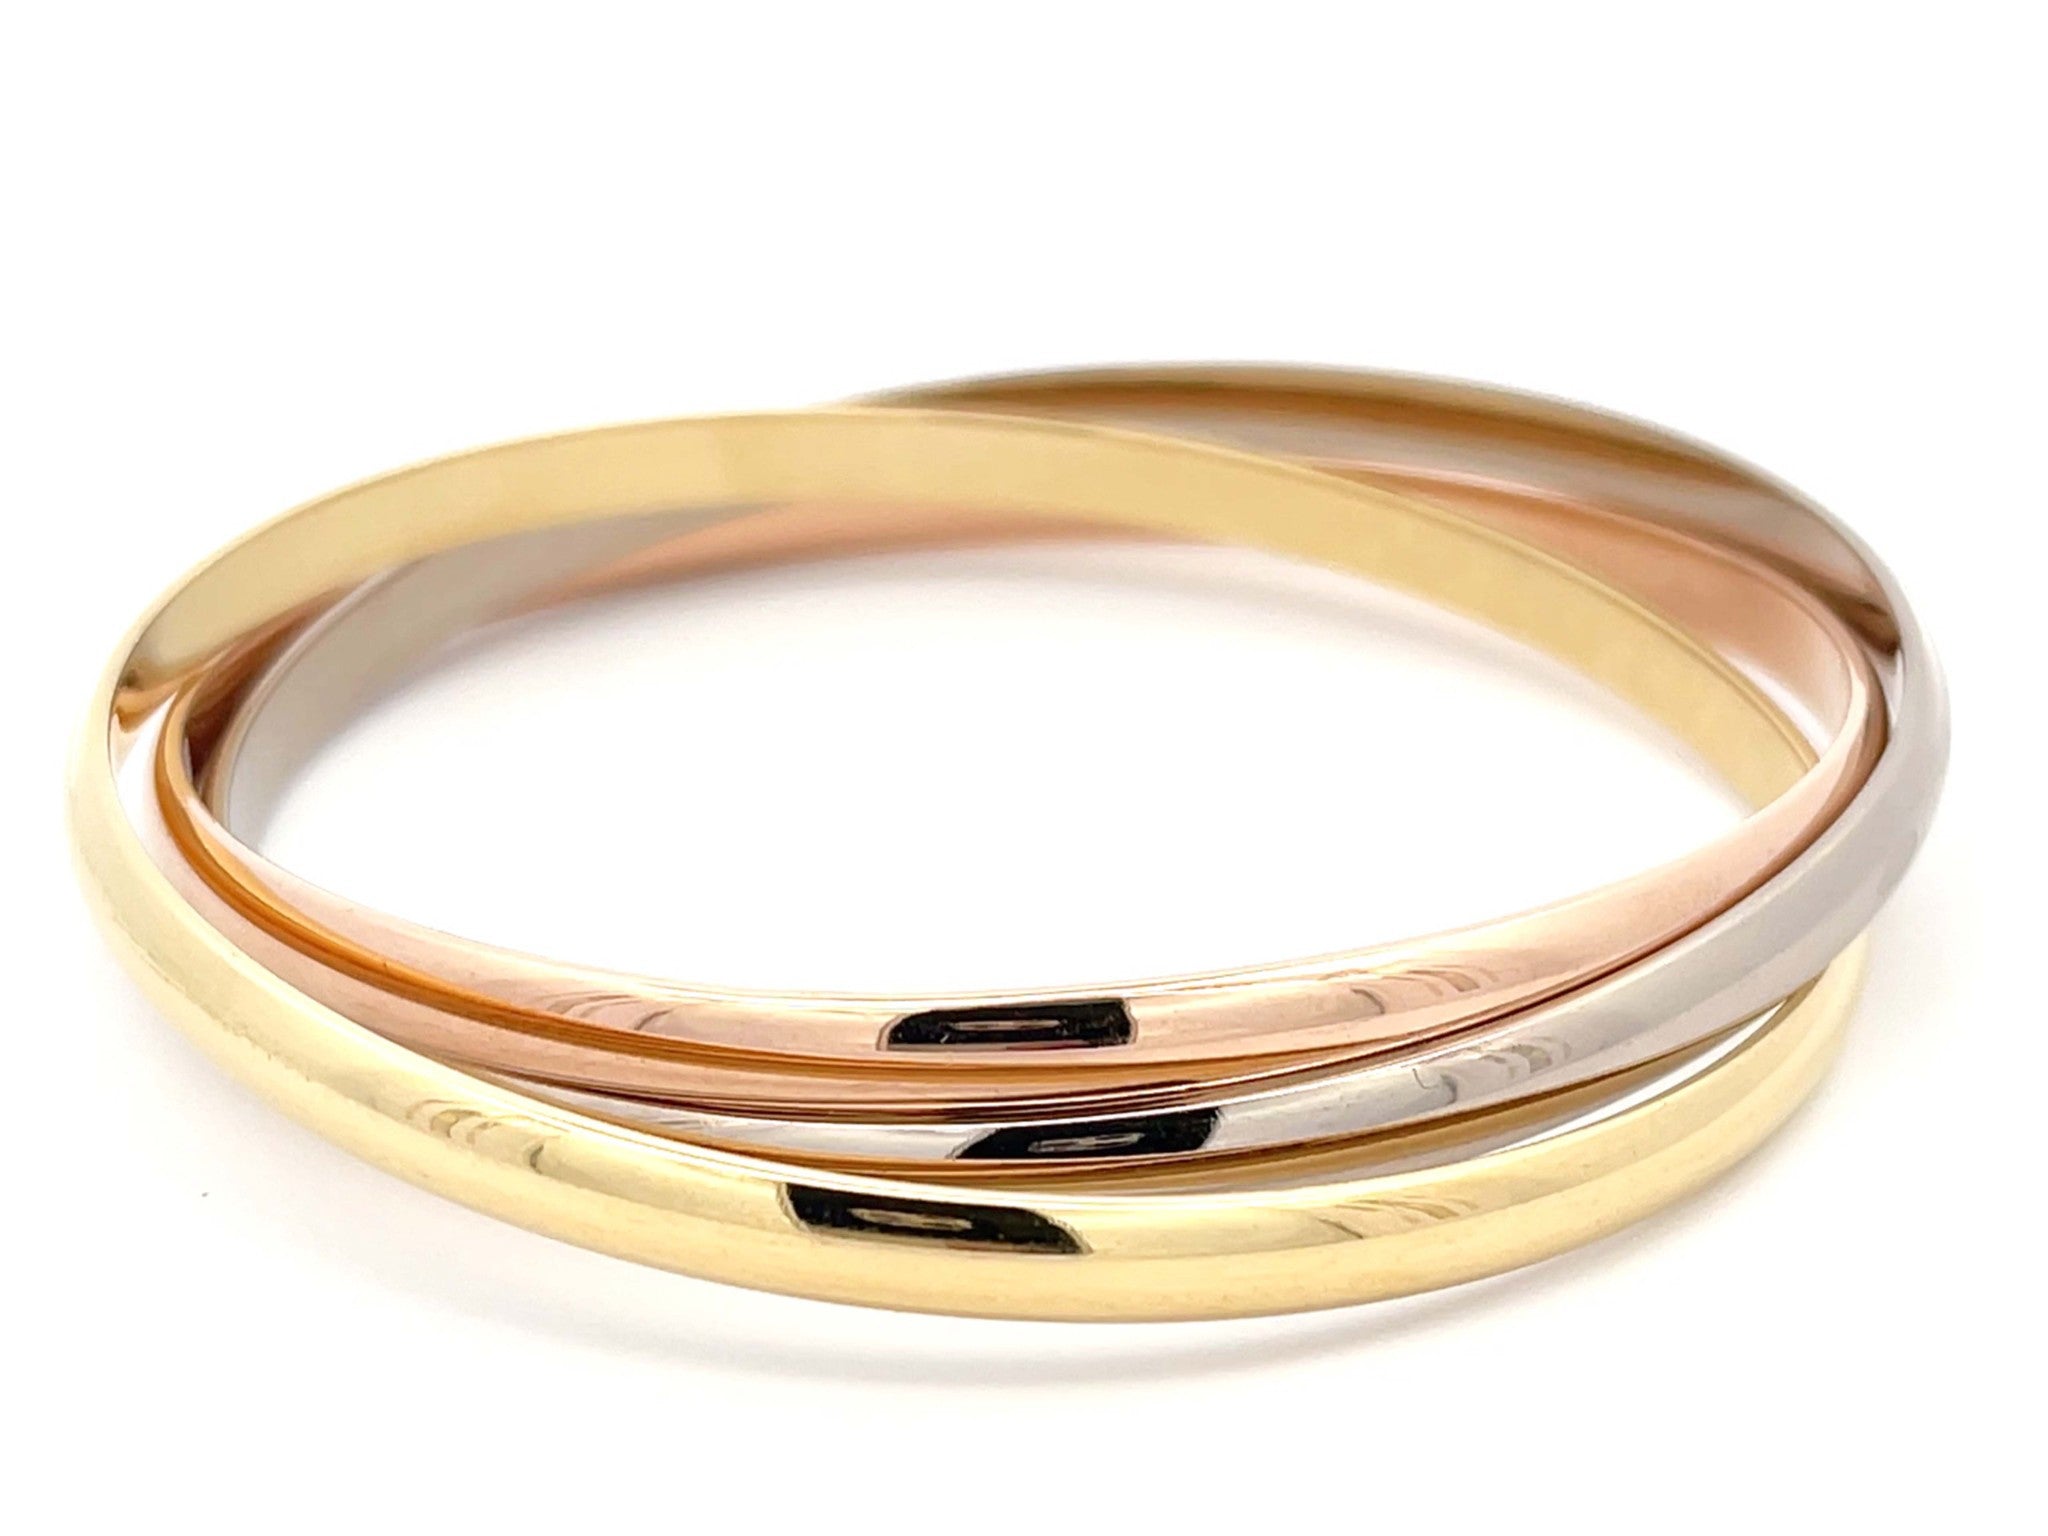 Cartier Trinity Bracelet in 18K White Yellow and Rose Gold